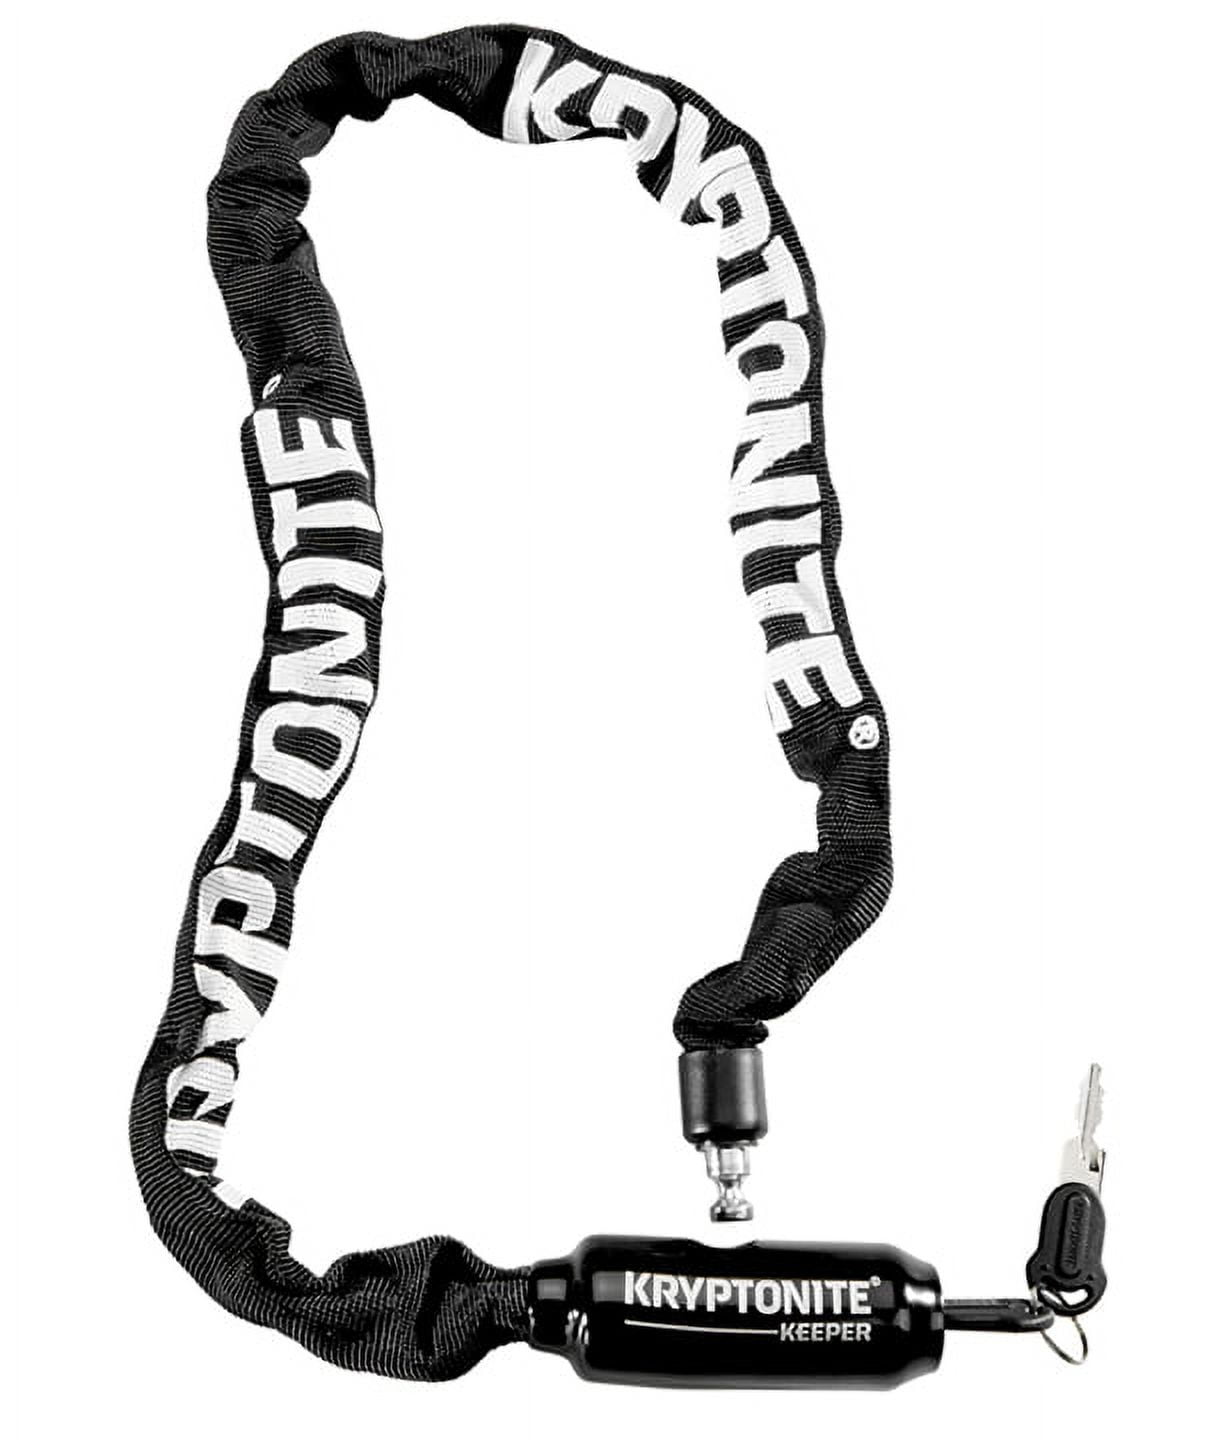  Kryptonite Keeper 585 Folding Bike Lock, Compact Lightweight  High Security Anti-Theft Foldable Bicycle Lock with 2 Keys and Mount for  E-Bikes Scooter Road Mountain Bikes, 85cm (33 in) : Sports